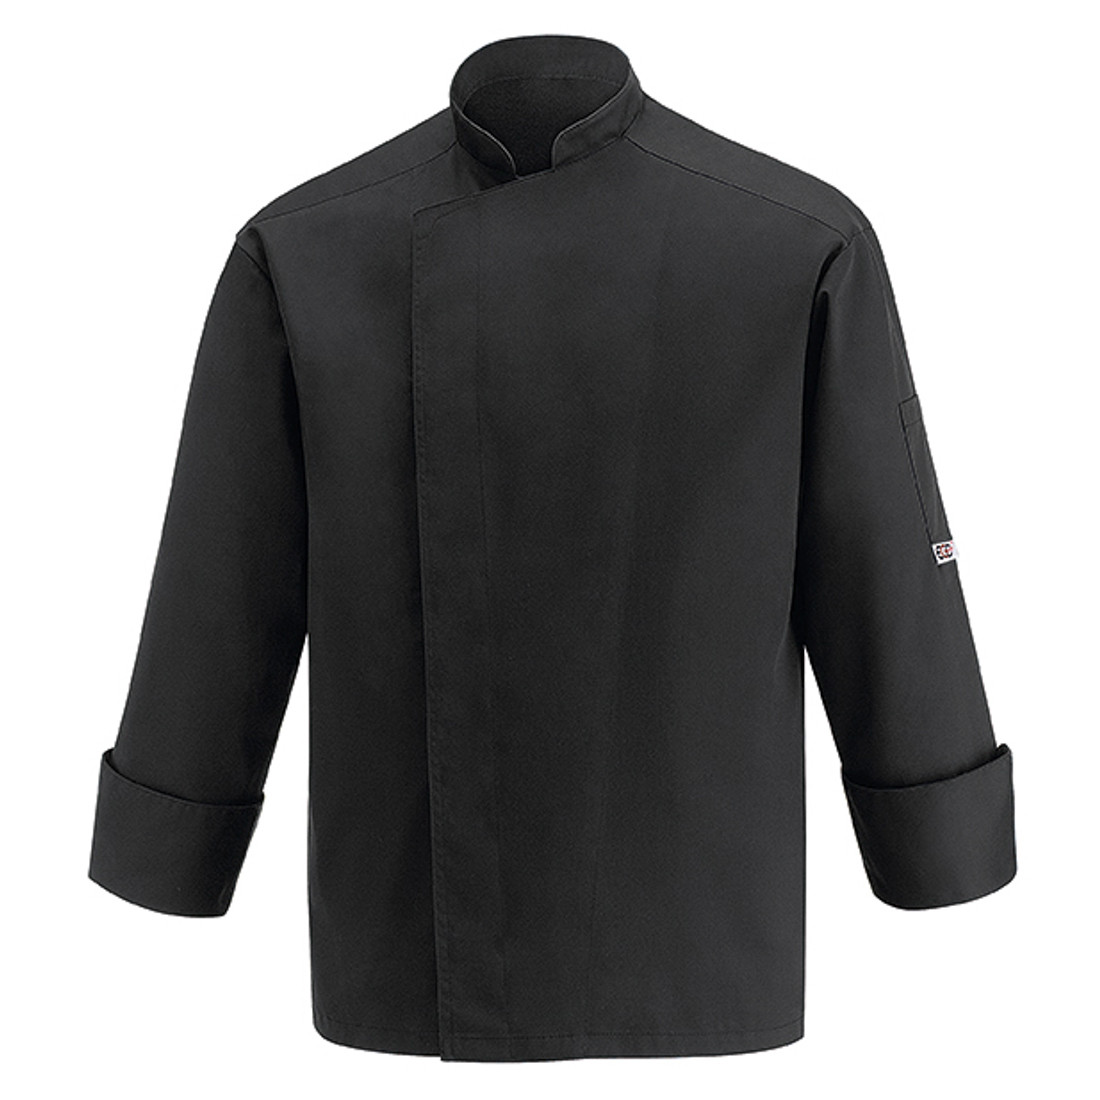 All Chef's Jacket, 65% polyester/35% cotton - Safetywear